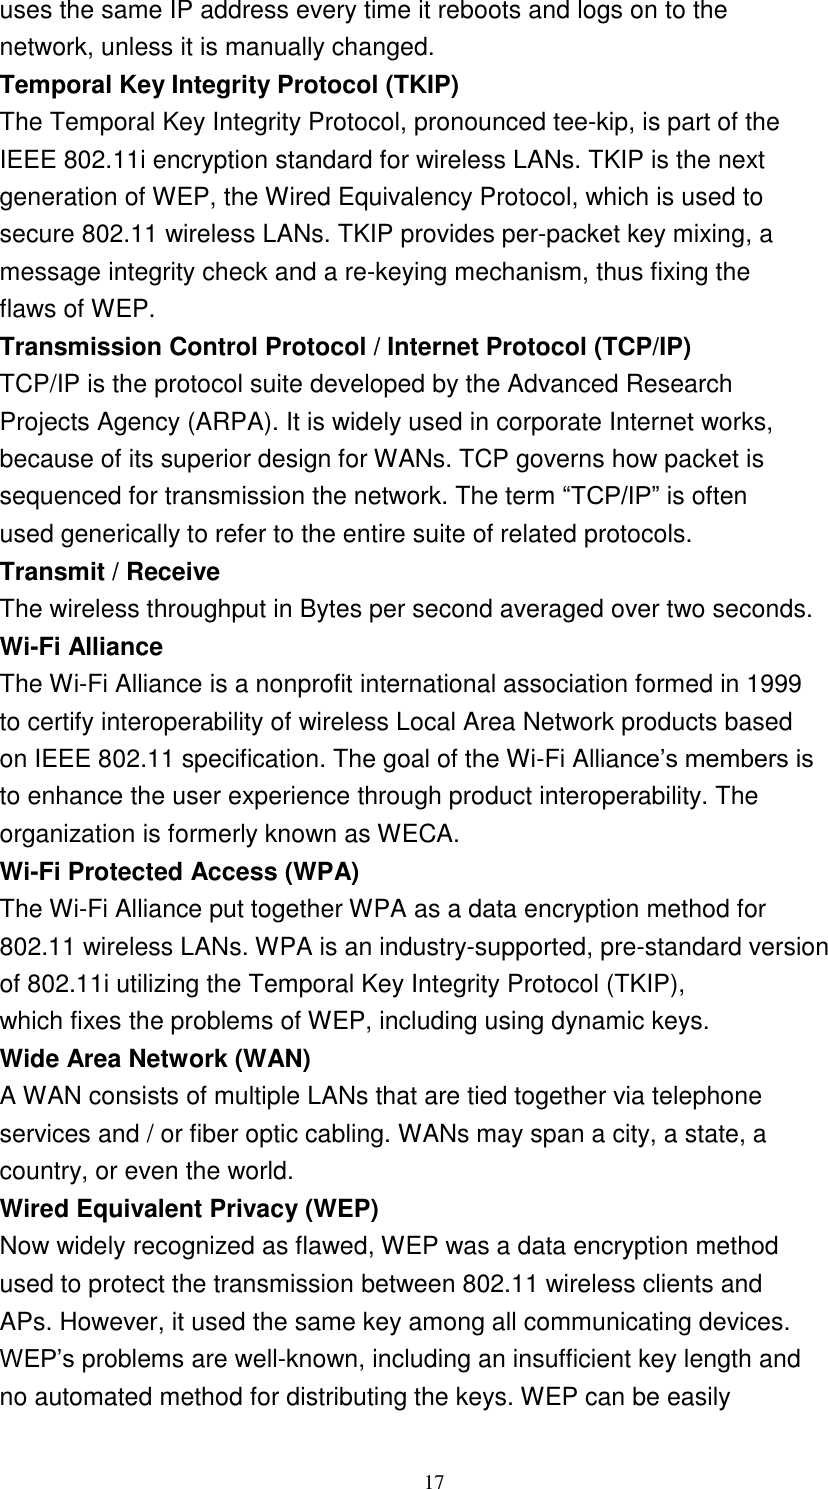 17    uses the same IP address every time it reboots and logs on to the network, unless it is manually changed. Temporal Key Integrity Protocol (TKIP) The Temporal Key Integrity Protocol, pronounced tee-kip, is part of the IEEE 802.11i encryption standard for wireless LANs. TKIP is the next generation of WEP, the Wired Equivalency Protocol, which is used to secure 802.11 wireless LANs. TKIP provides per-packet key mixing, a message integrity check and a re-keying mechanism, thus fixing the flaws of WEP. Transmission Control Protocol / Internet Protocol (TCP/IP) TCP/IP is the protocol suite developed by the Advanced Research Projects Agency (ARPA). It is widely used in corporate Internet works, because of its superior design for WANs. TCP governs how packet is sequenced for transmission the network. The term “TCP/IP” is often used generically to refer to the entire suite of related protocols. Transmit / Receive The wireless throughput in Bytes per second averaged over two seconds. Wi-Fi Alliance The Wi-Fi Alliance is a nonprofit international association formed in 1999 to certify interoperability of wireless Local Area Network products based on IEEE 802.11 specification. The goal of the Wi-Fi Alliance’s members is to enhance the user experience through product interoperability. The organization is formerly known as WECA. Wi-Fi Protected Access (WPA) The Wi-Fi Alliance put together WPA as a data encryption method for 802.11 wireless LANs. WPA is an industry-supported, pre-standard version of 802.11i utilizing the Temporal Key Integrity Protocol (TKIP), which fixes the problems of WEP, including using dynamic keys. Wide Area Network (WAN) A WAN consists of multiple LANs that are tied together via telephone services and / or fiber optic cabling. WANs may span a city, a state, a country, or even the world. Wired Equivalent Privacy (WEP) Now widely recognized as flawed, WEP was a data encryption method used to protect the transmission between 802.11 wireless clients and APs. However, it used the same key among all communicating devices. WEP’s problems are well-known, including an insufficient key length and no automated method for distributing the keys. WEP can be easily 